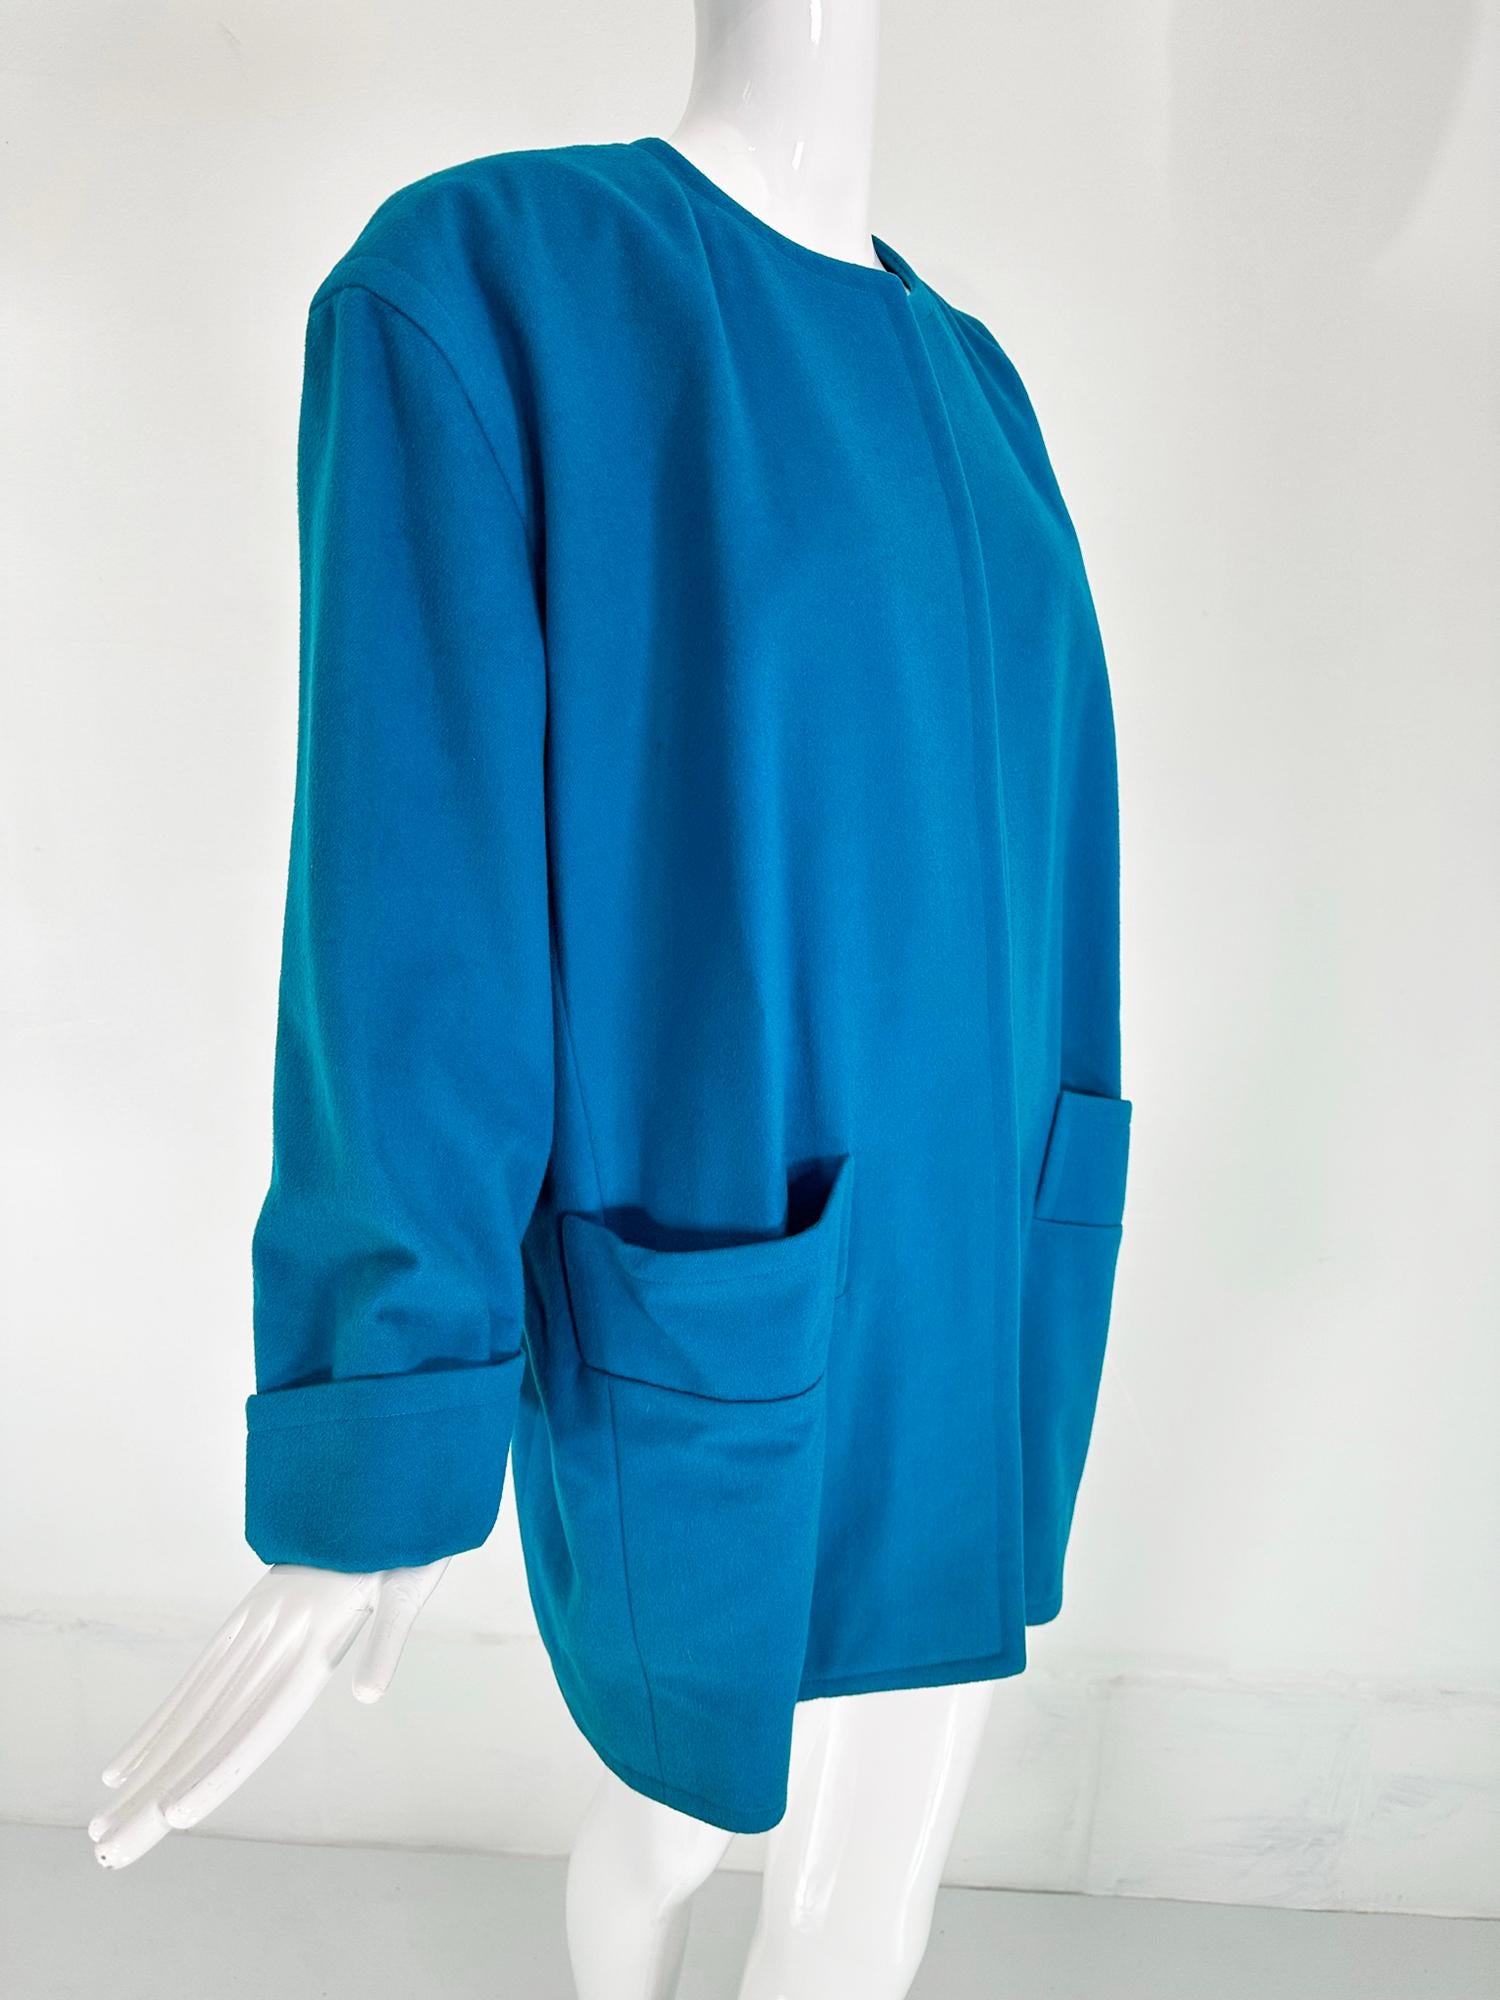 Givenchy turquoise wool open front swing coat with banded angled hip front pockets from the 1980s. Round neck coat is open at the front, dropped shoulders with  long full sleeves and turn back cuffs. The coat can be worn belted for a sleek look or